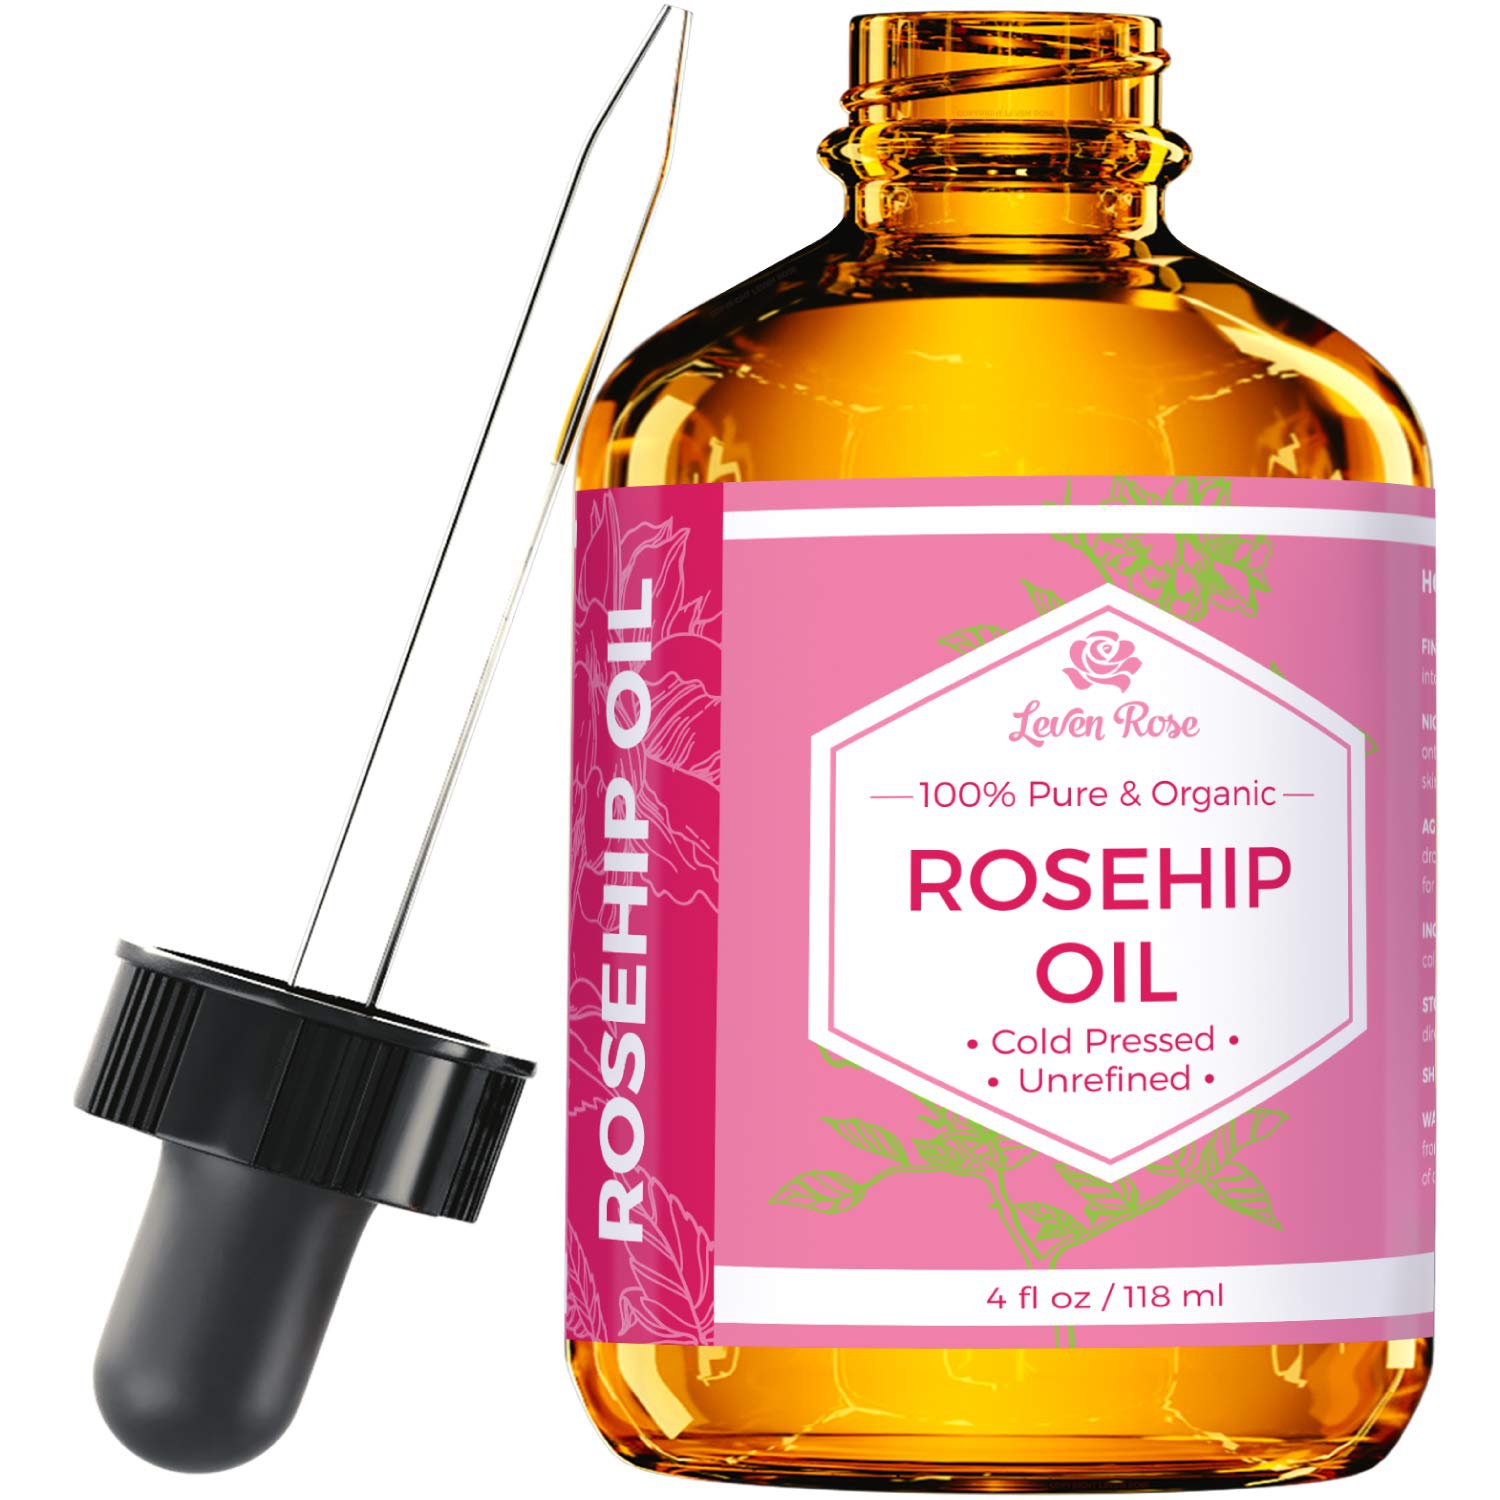 Leven Rose Rosehip Seed Oil